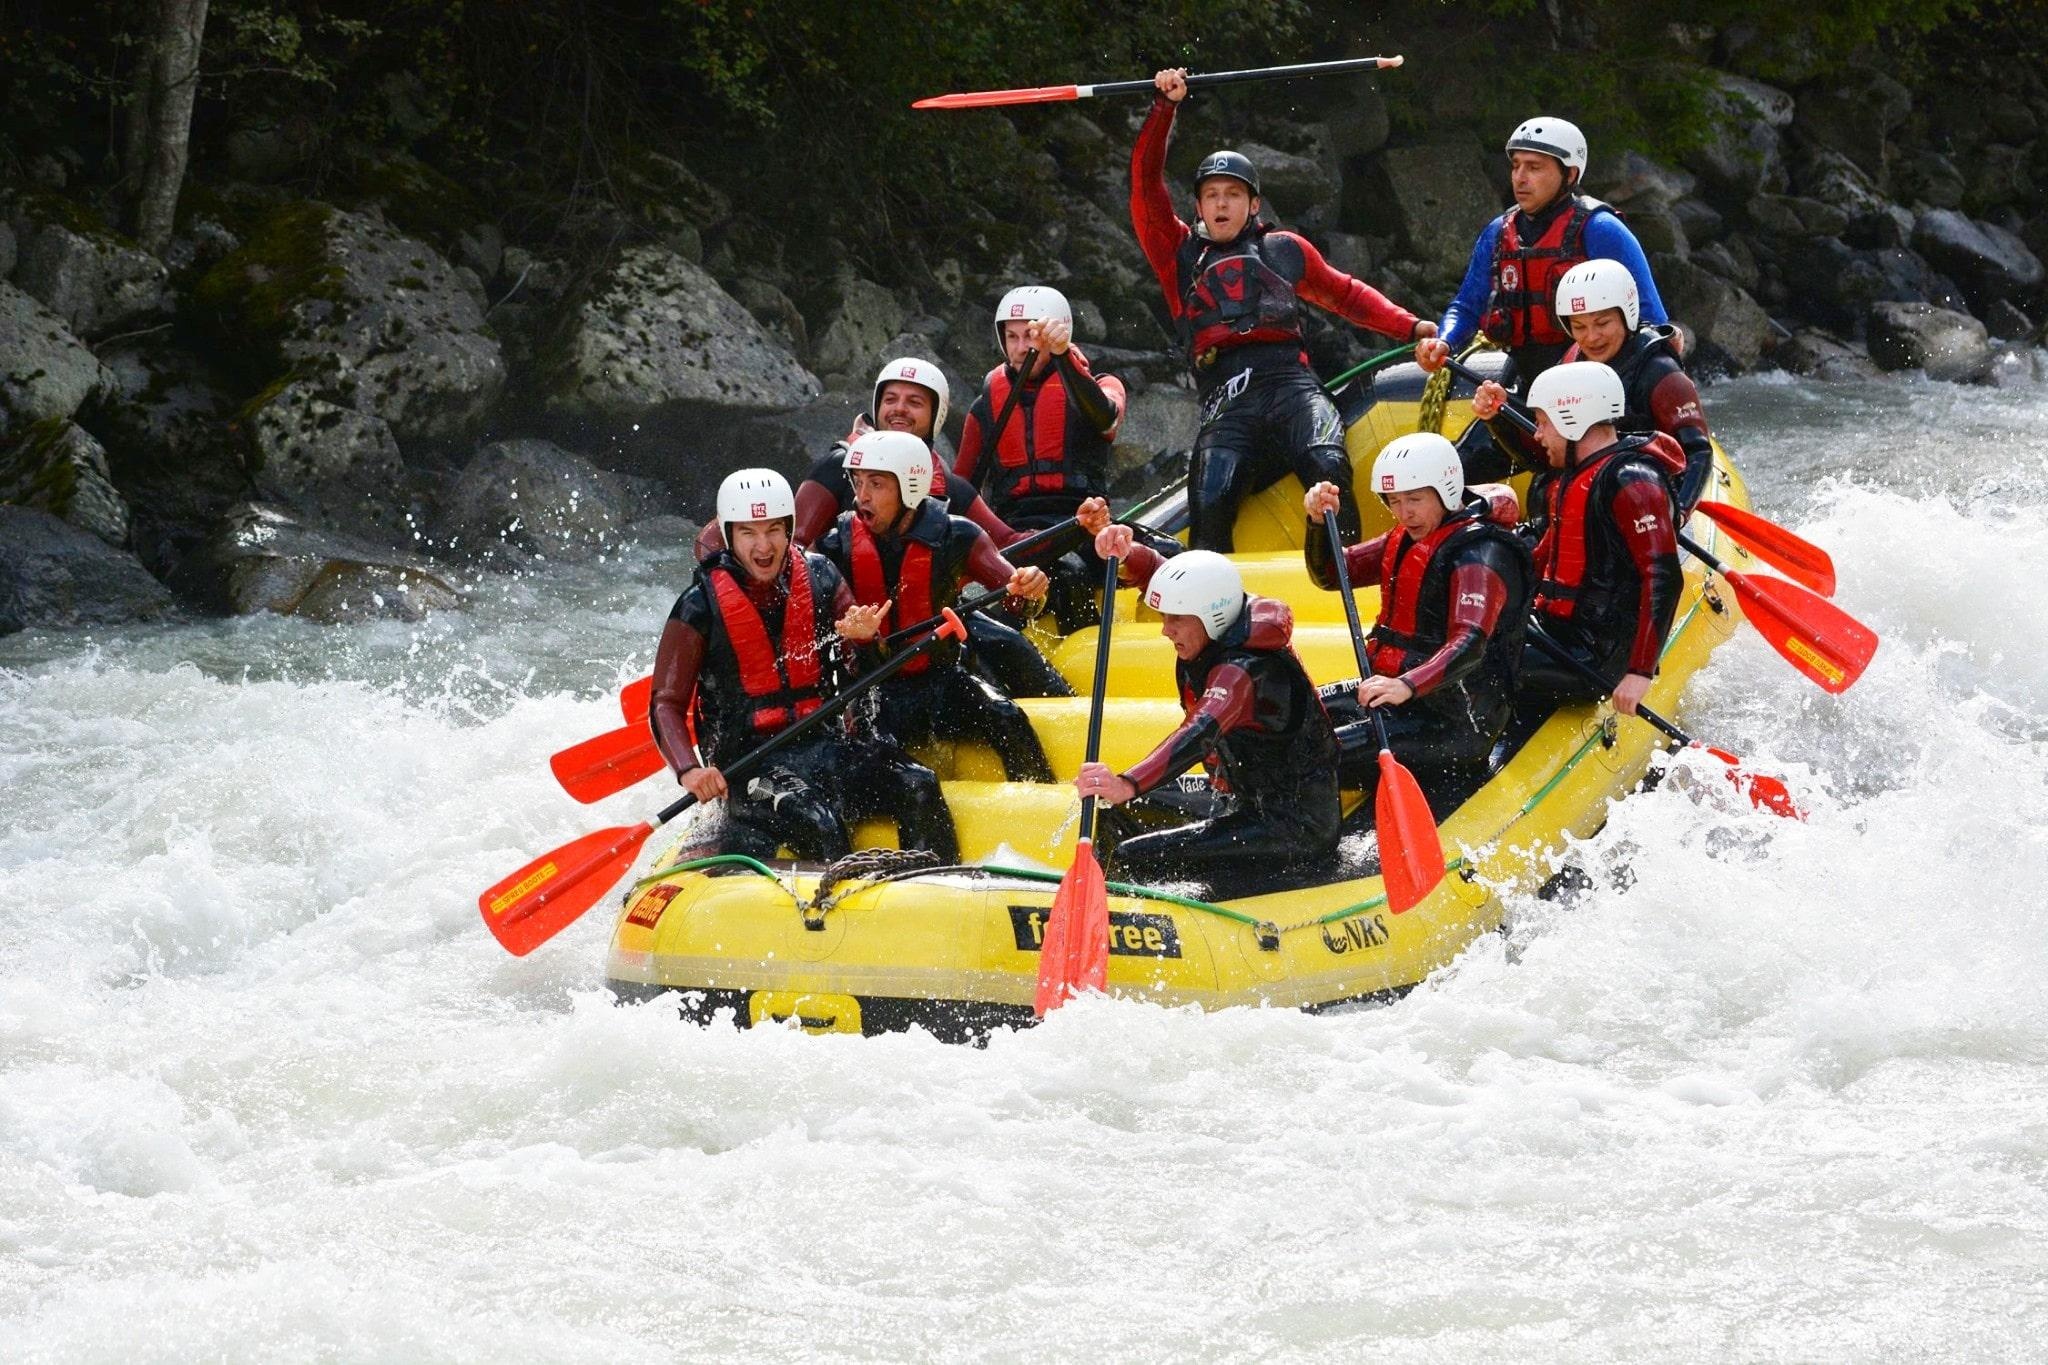 Rafting: An extreme trip down the mountain river, Skilled maneuvering in water sports. 2050x1370 HD Background.